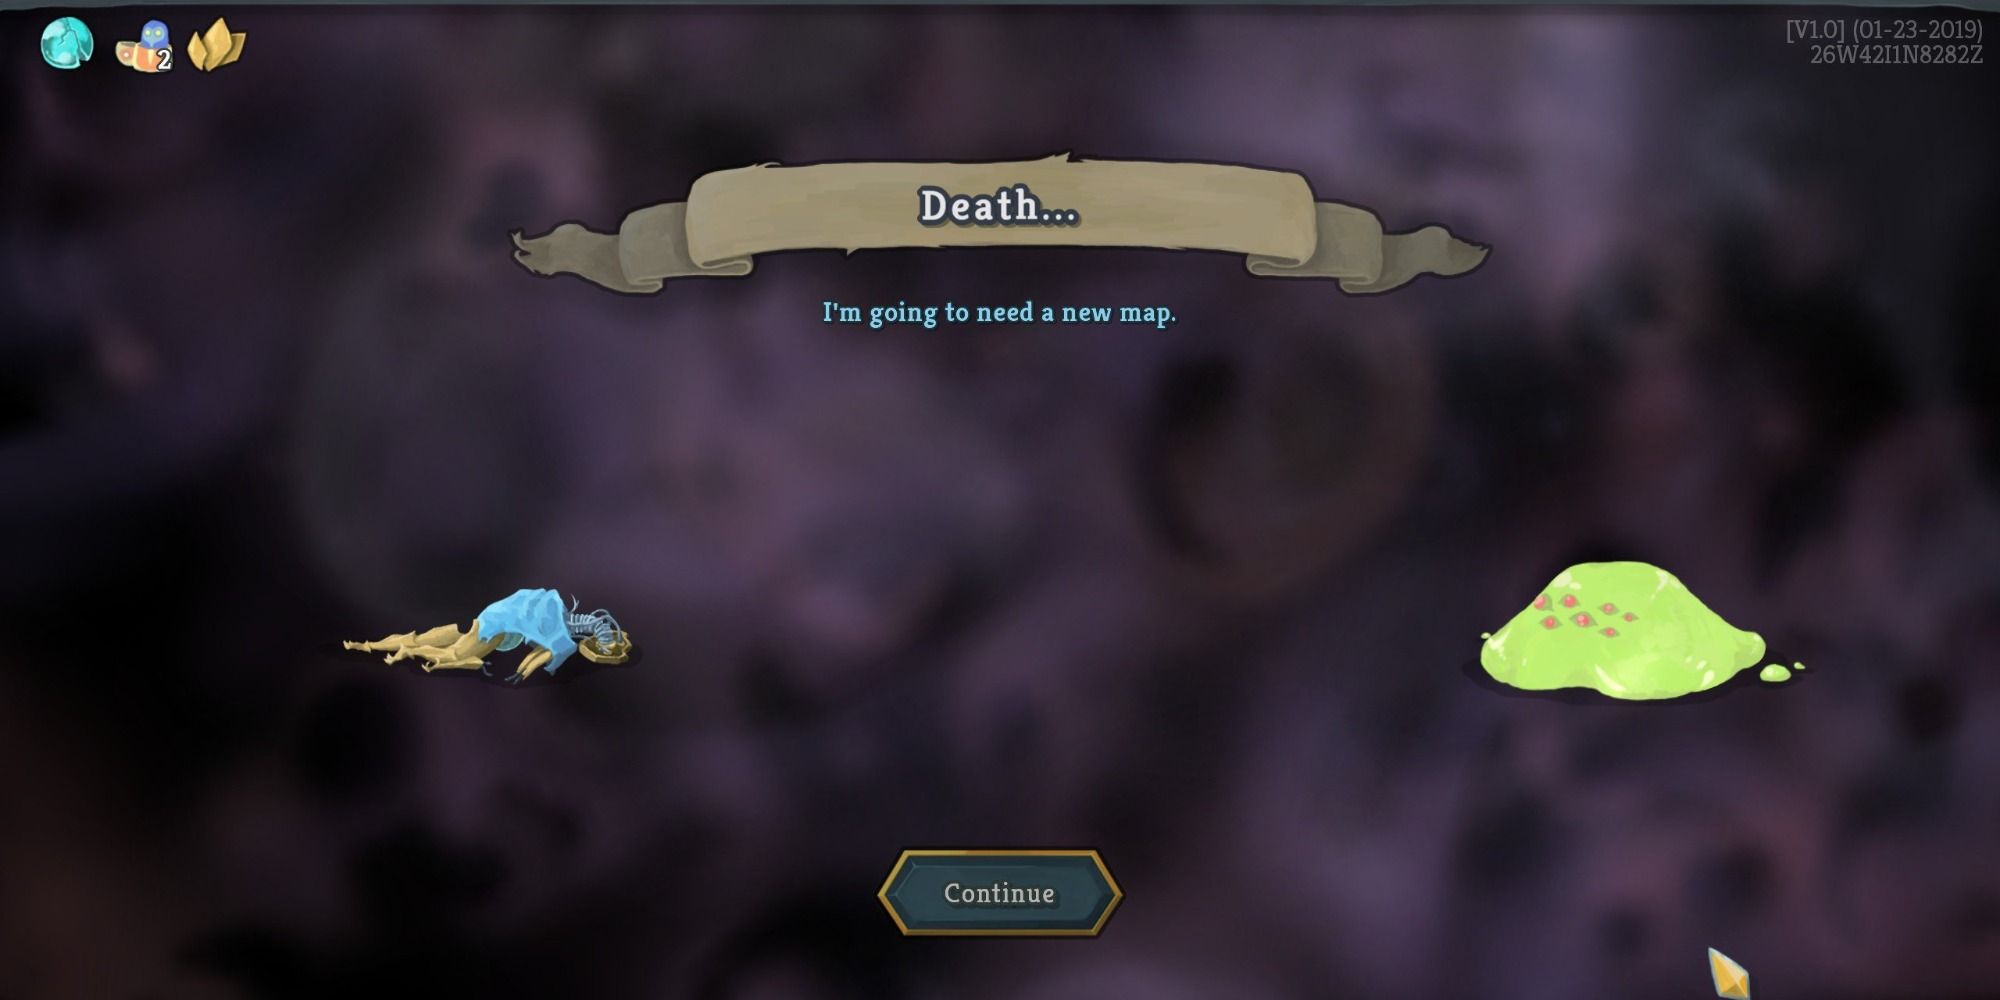 A screenshot showing the game over screen in Slay the Spire